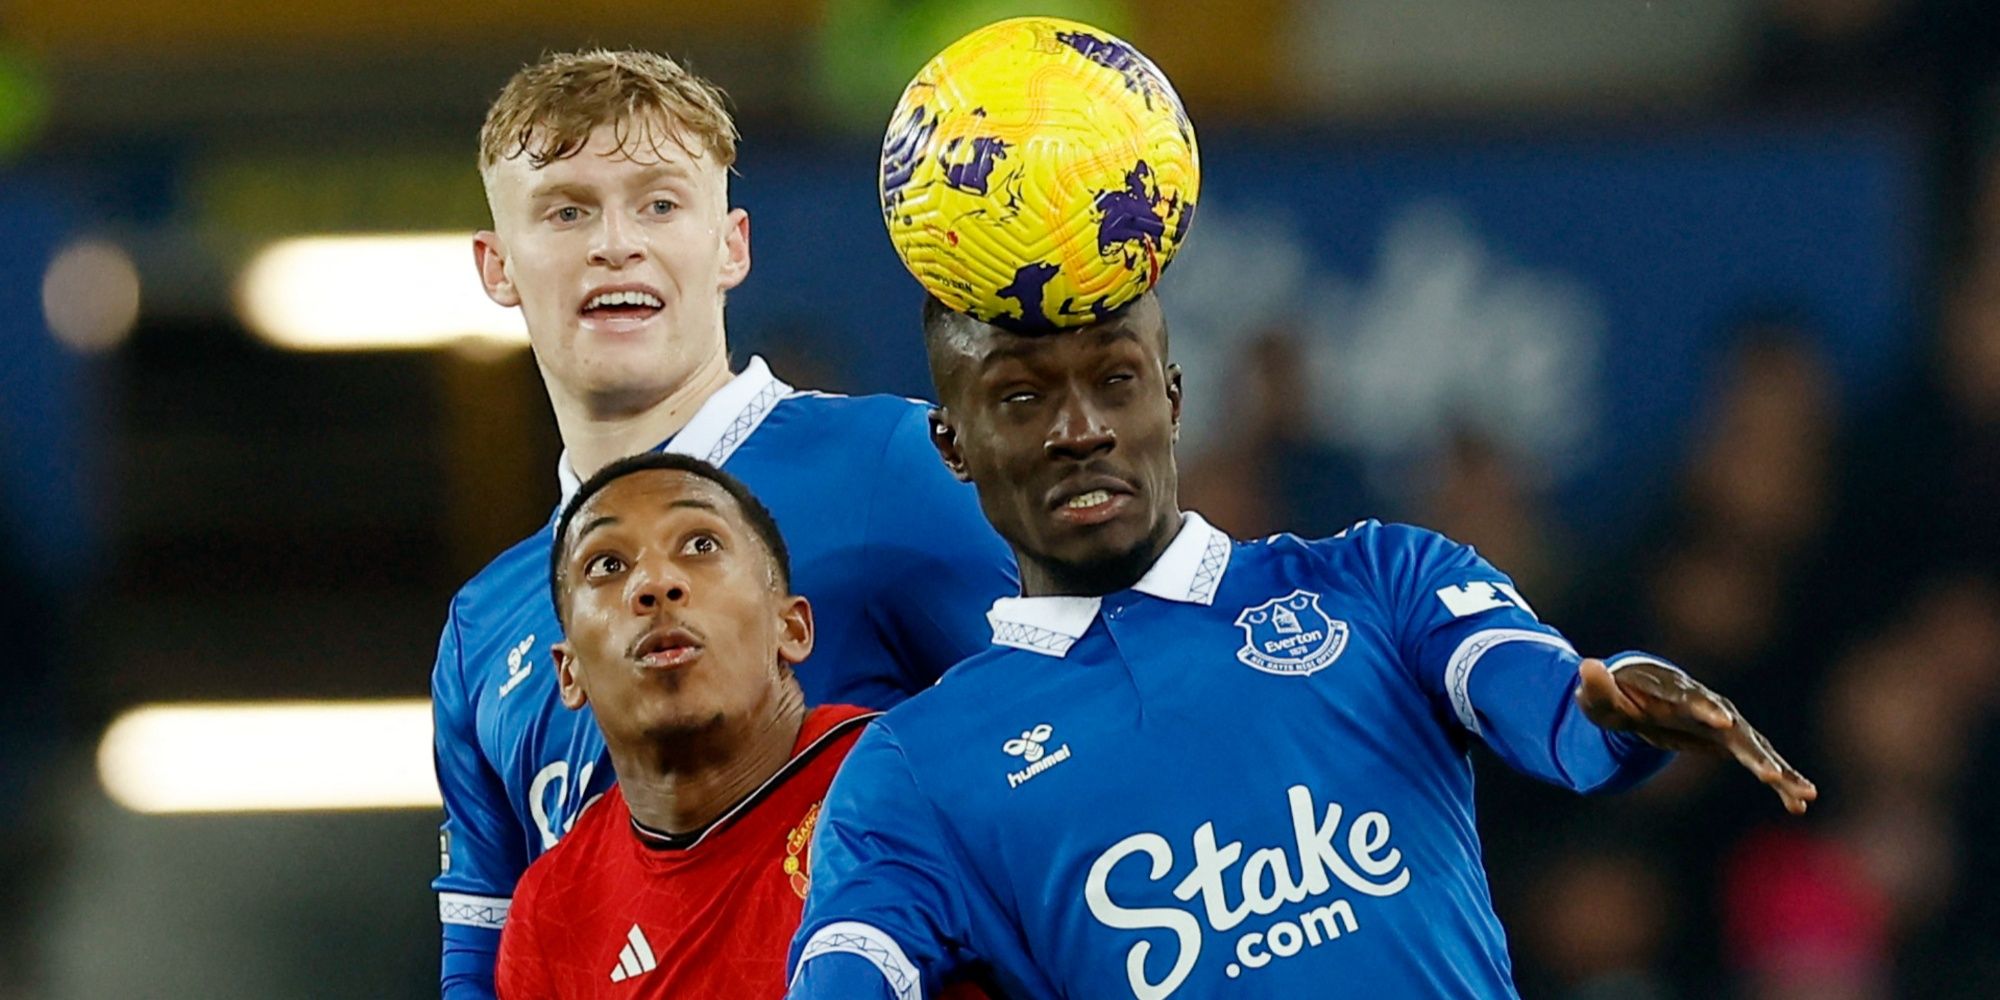 Manchester United's Anthony Martial in action with Everton's Jarrad Branthwaite and Idrissa Gueye